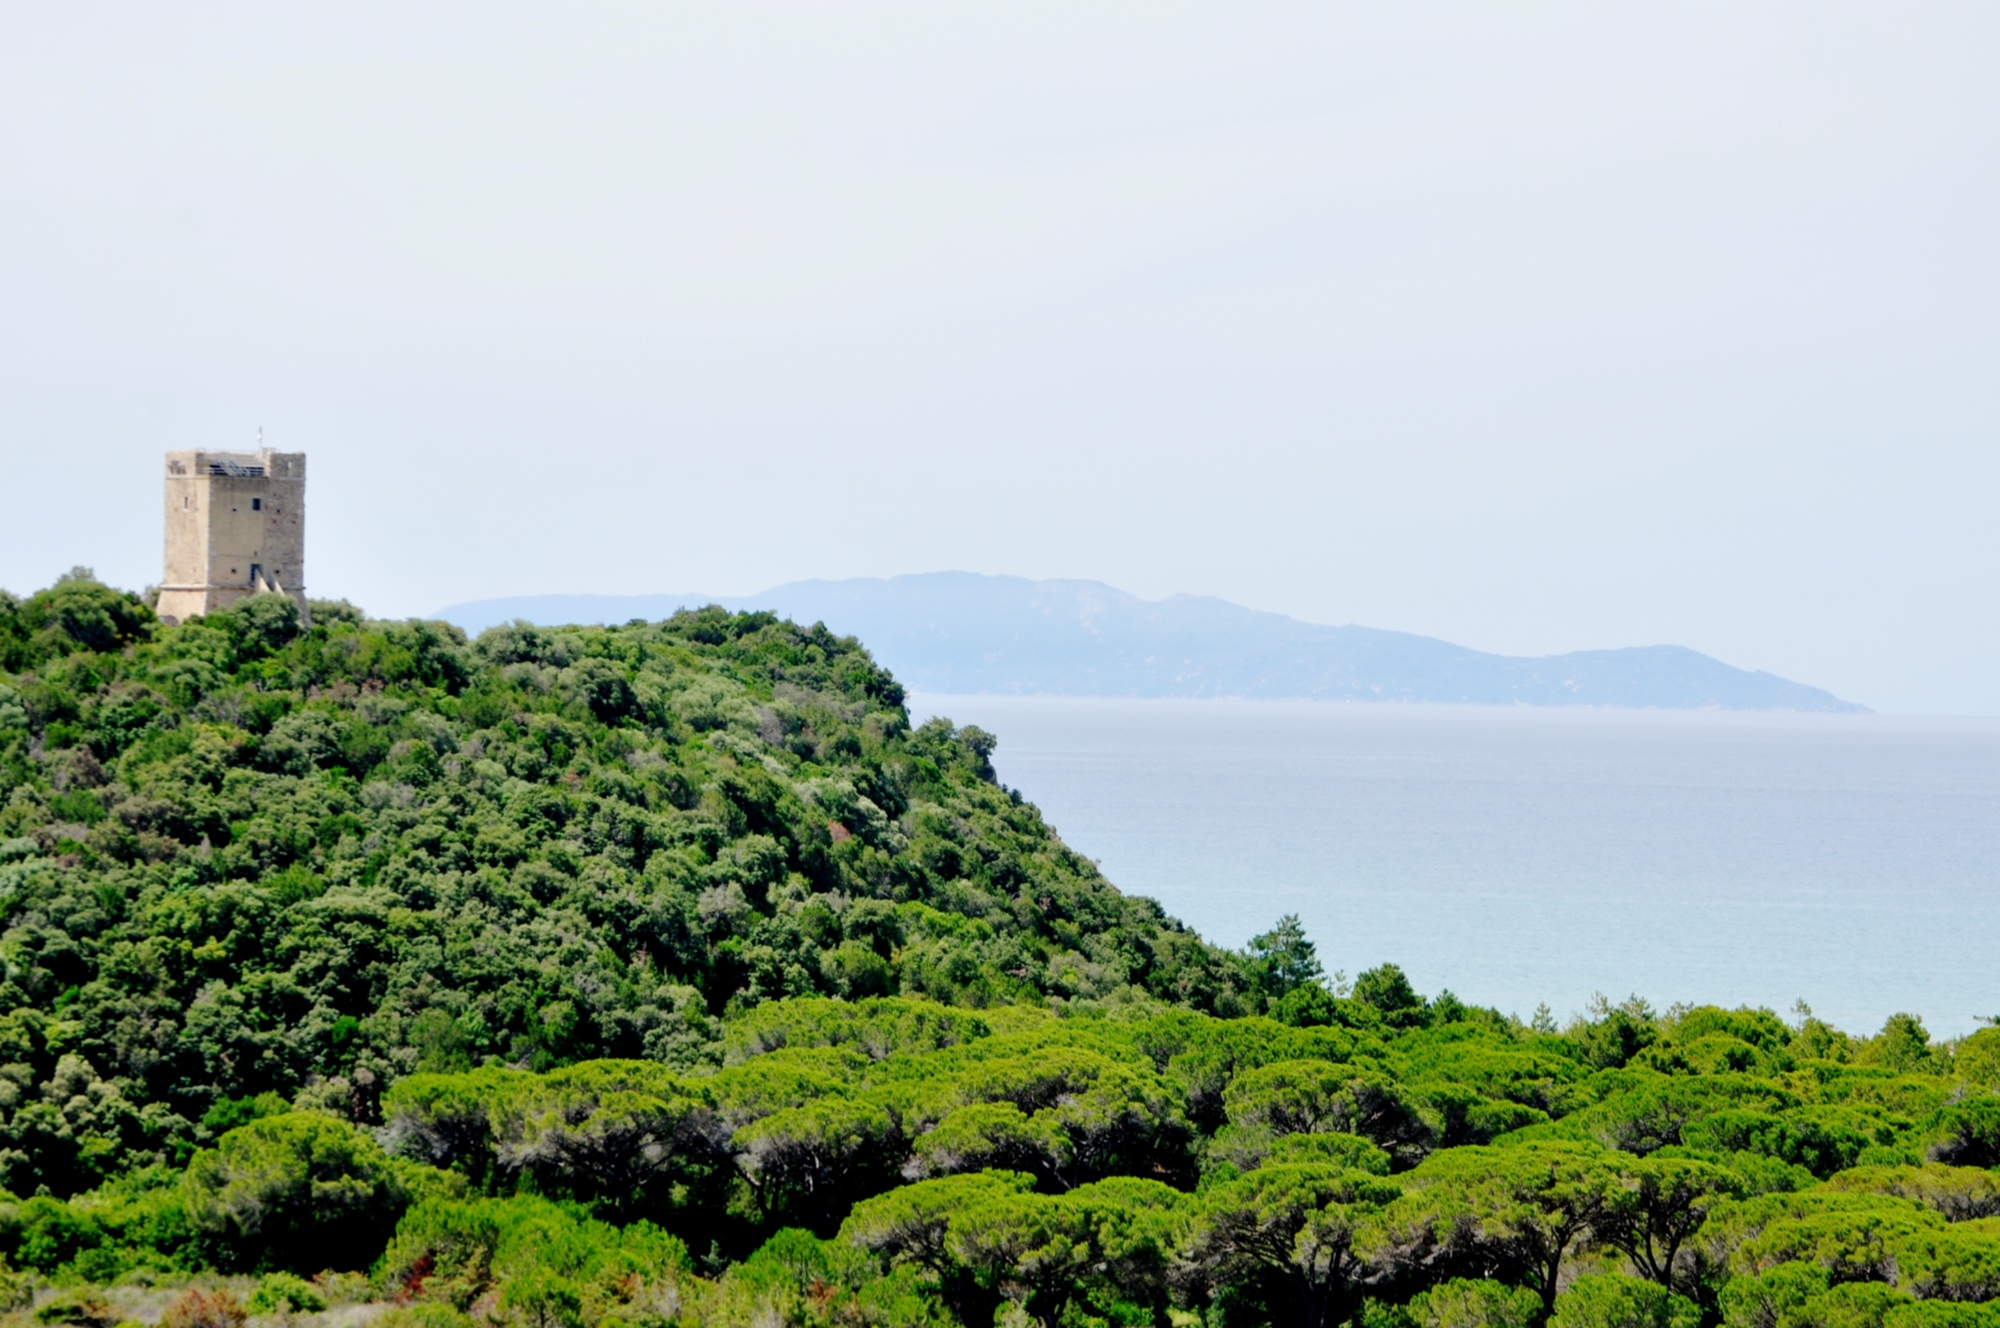 A glimpse of the Maremma Natural Park (ft tower)